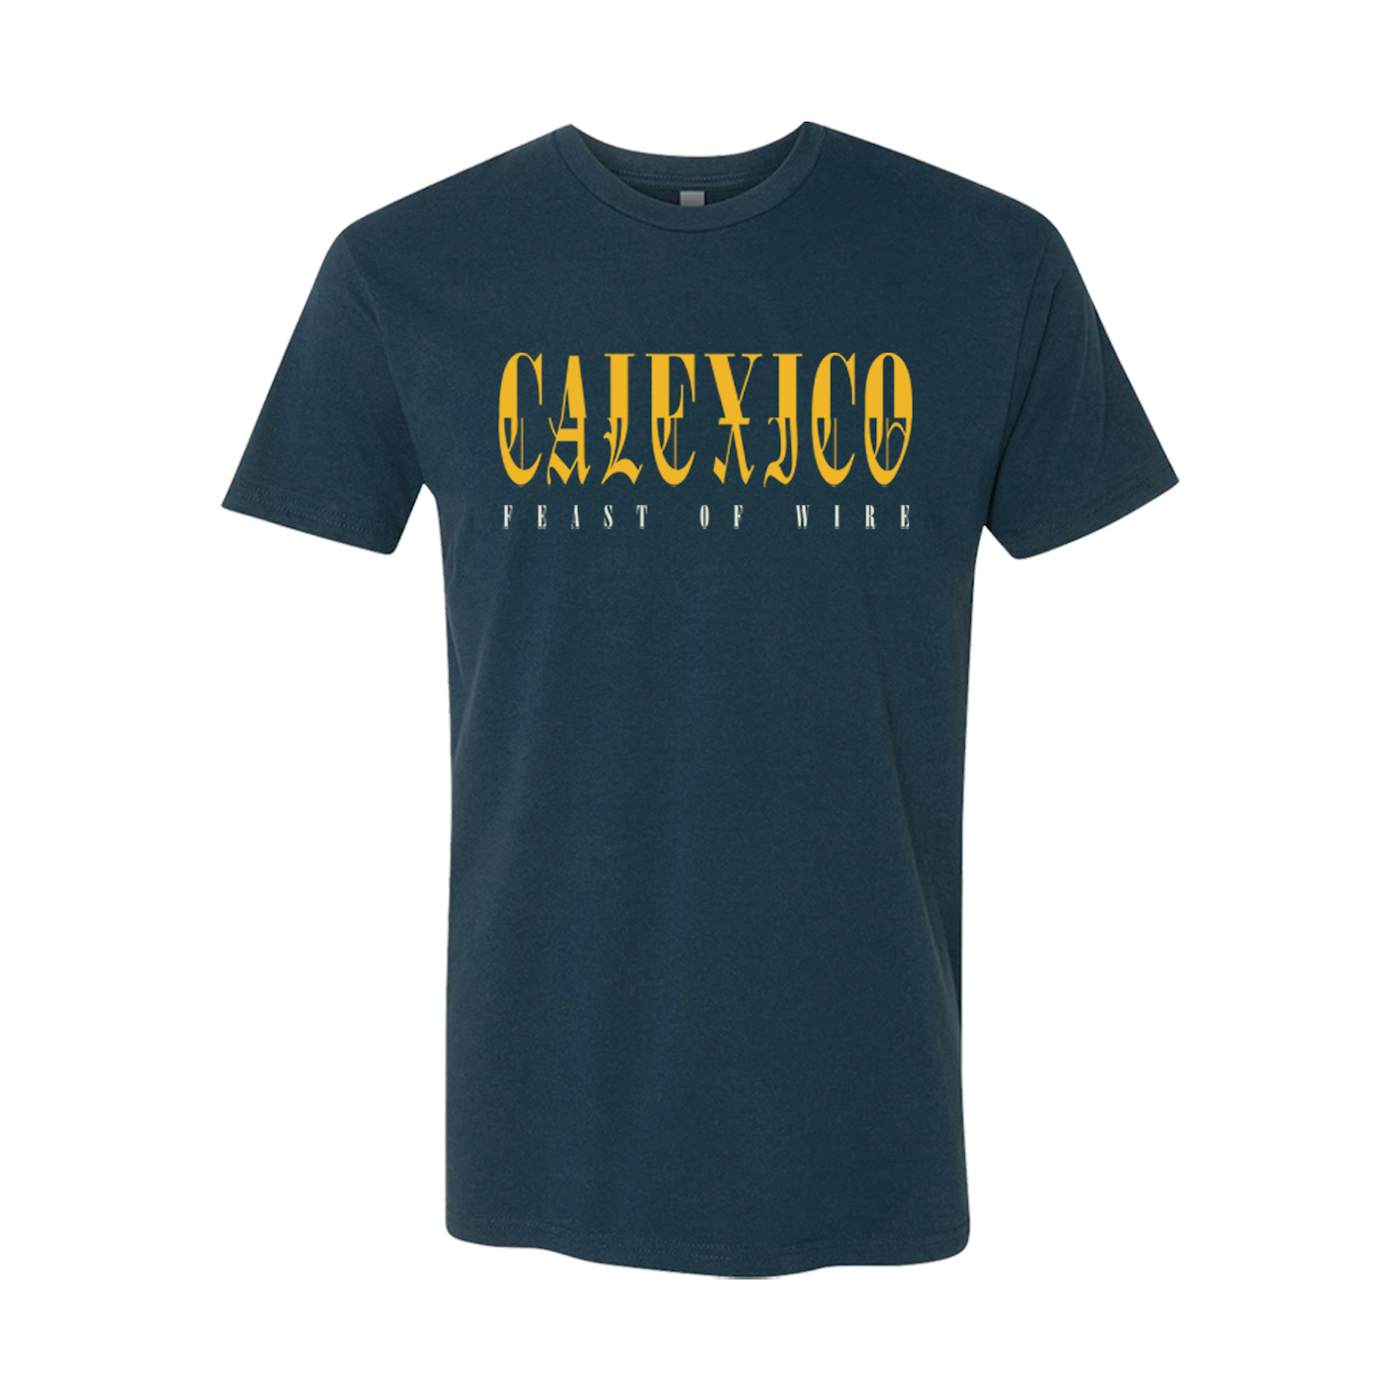 Calexico Feast of Wire Tee